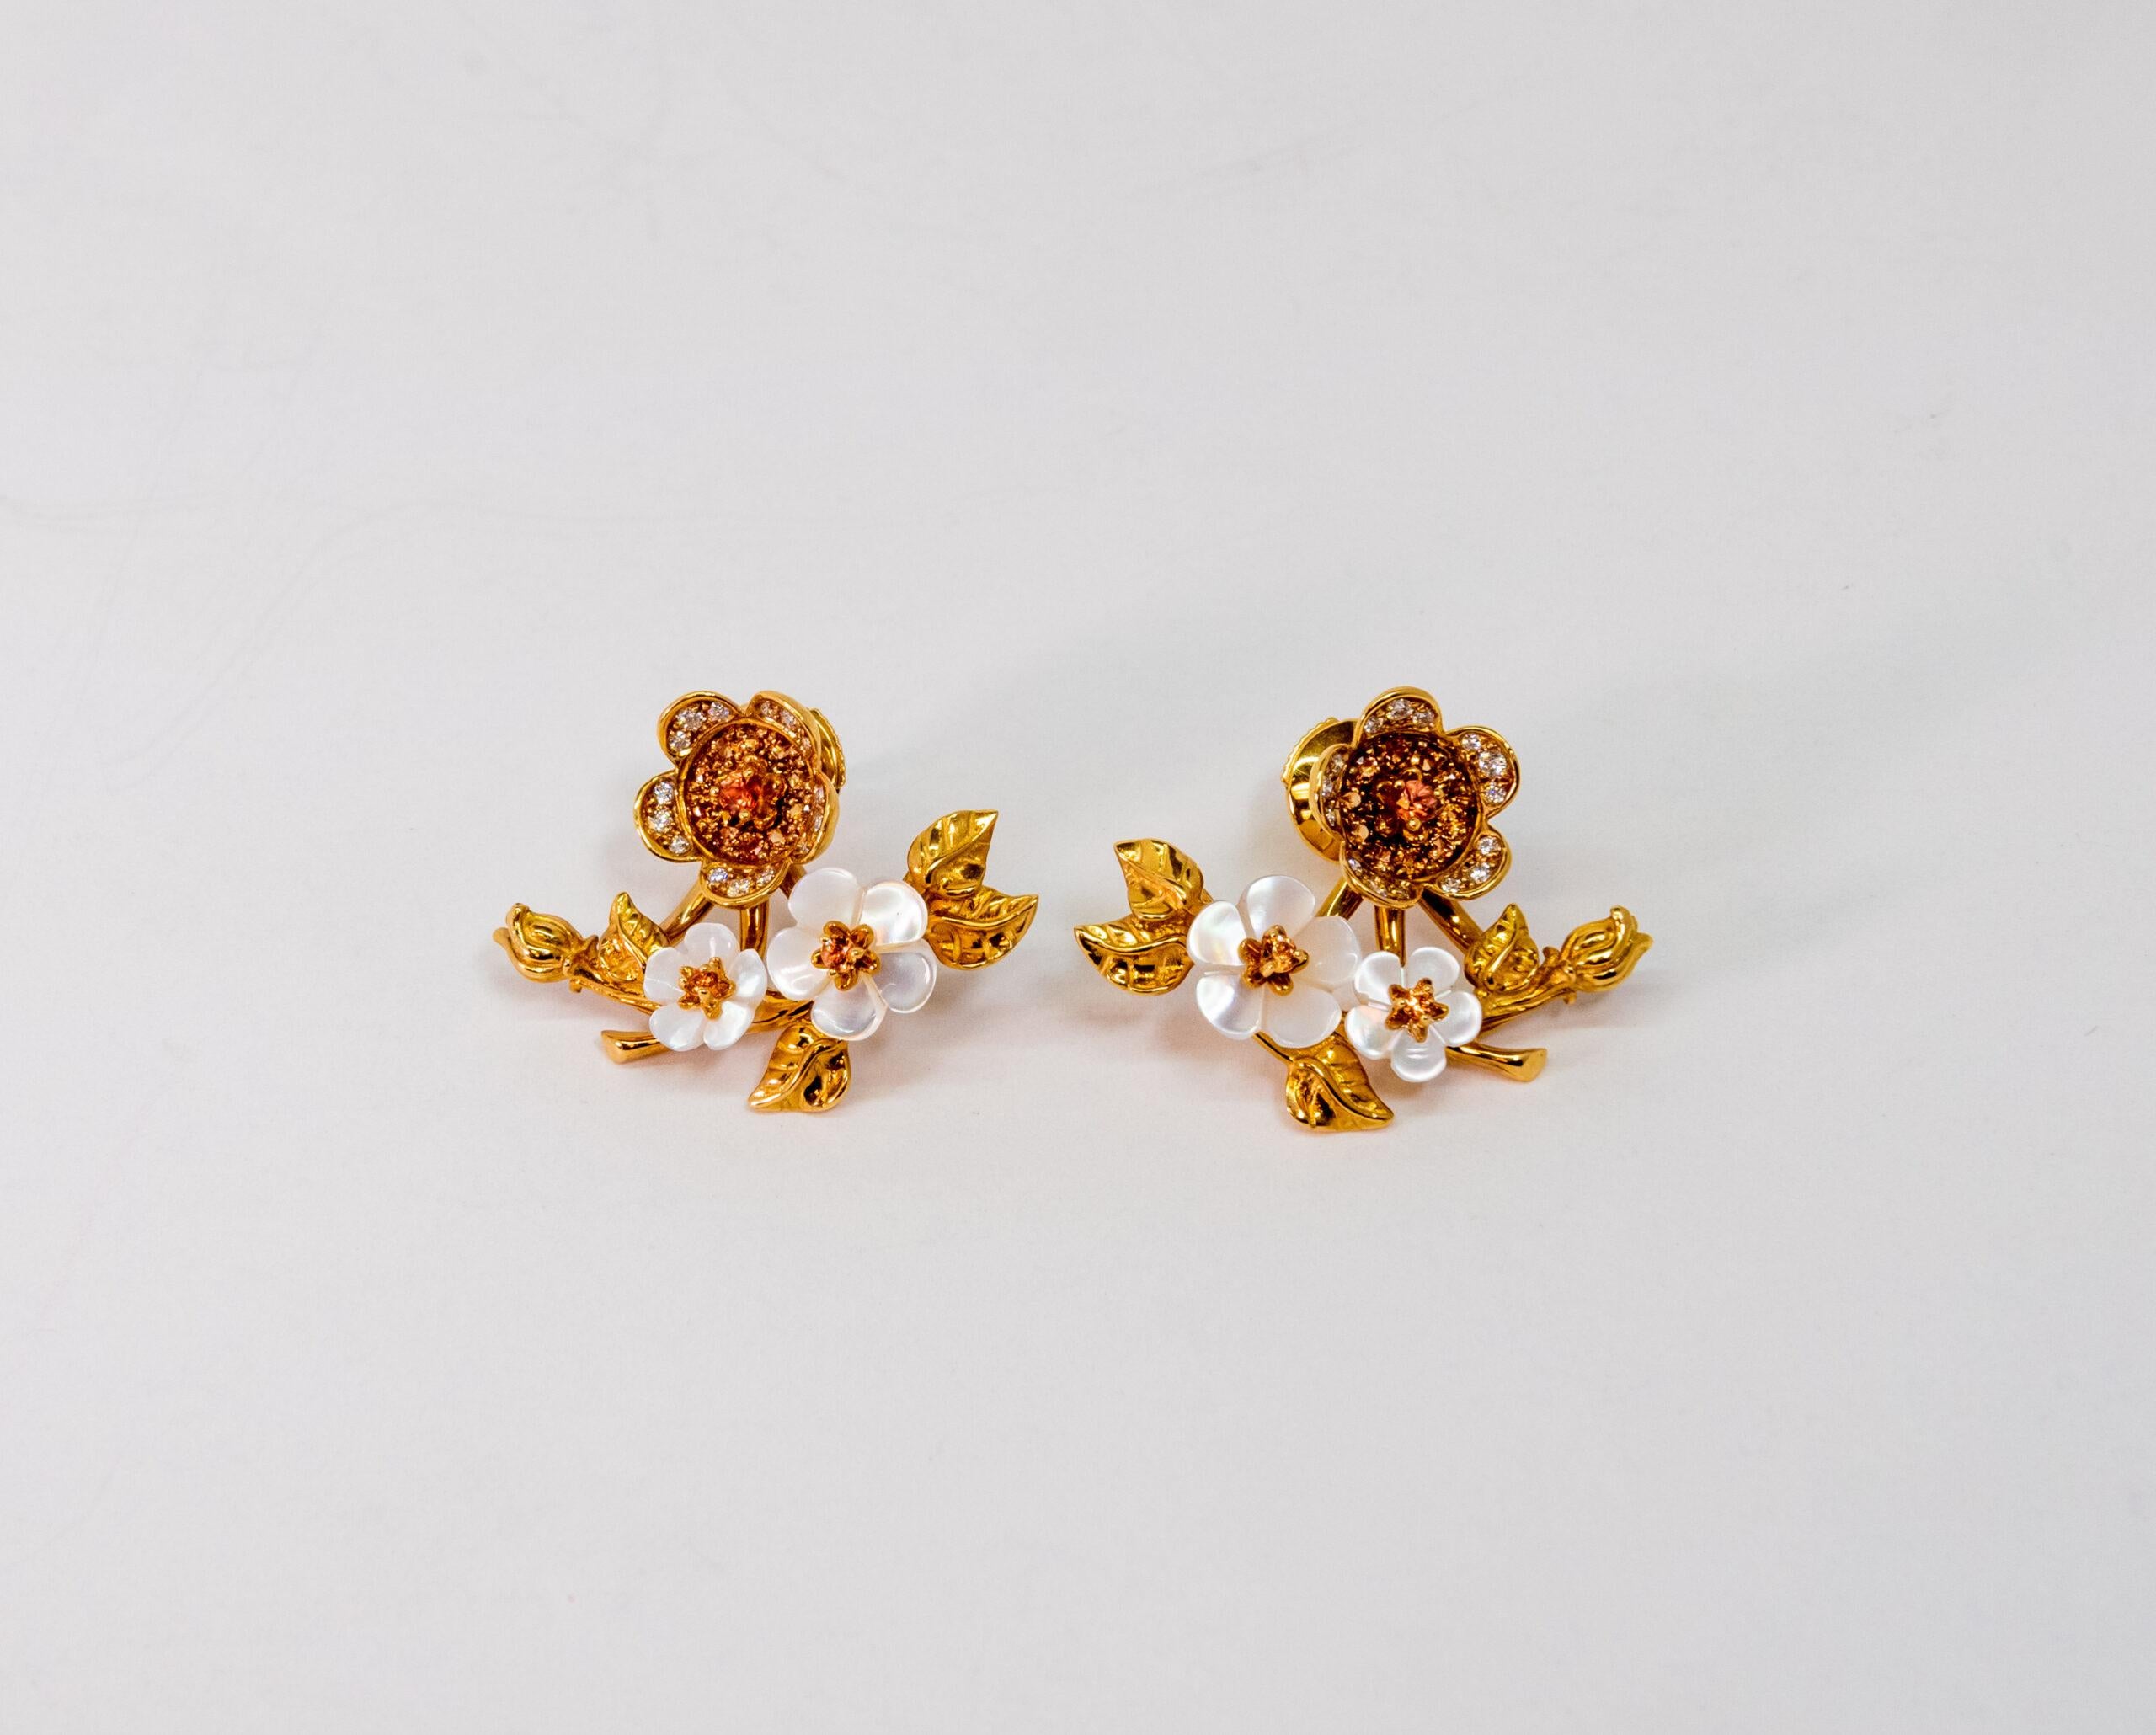 10070436 Carrera y Carrera
This 18K Yellow Gold stud earring is made as spring of flowers. Two Mother of Pearl flowers set with 2 orange diamonds. Third flower figure set with 15 White diamonds and 11 Orange Diamonds. Diamonds are totaling ~0.20ct.